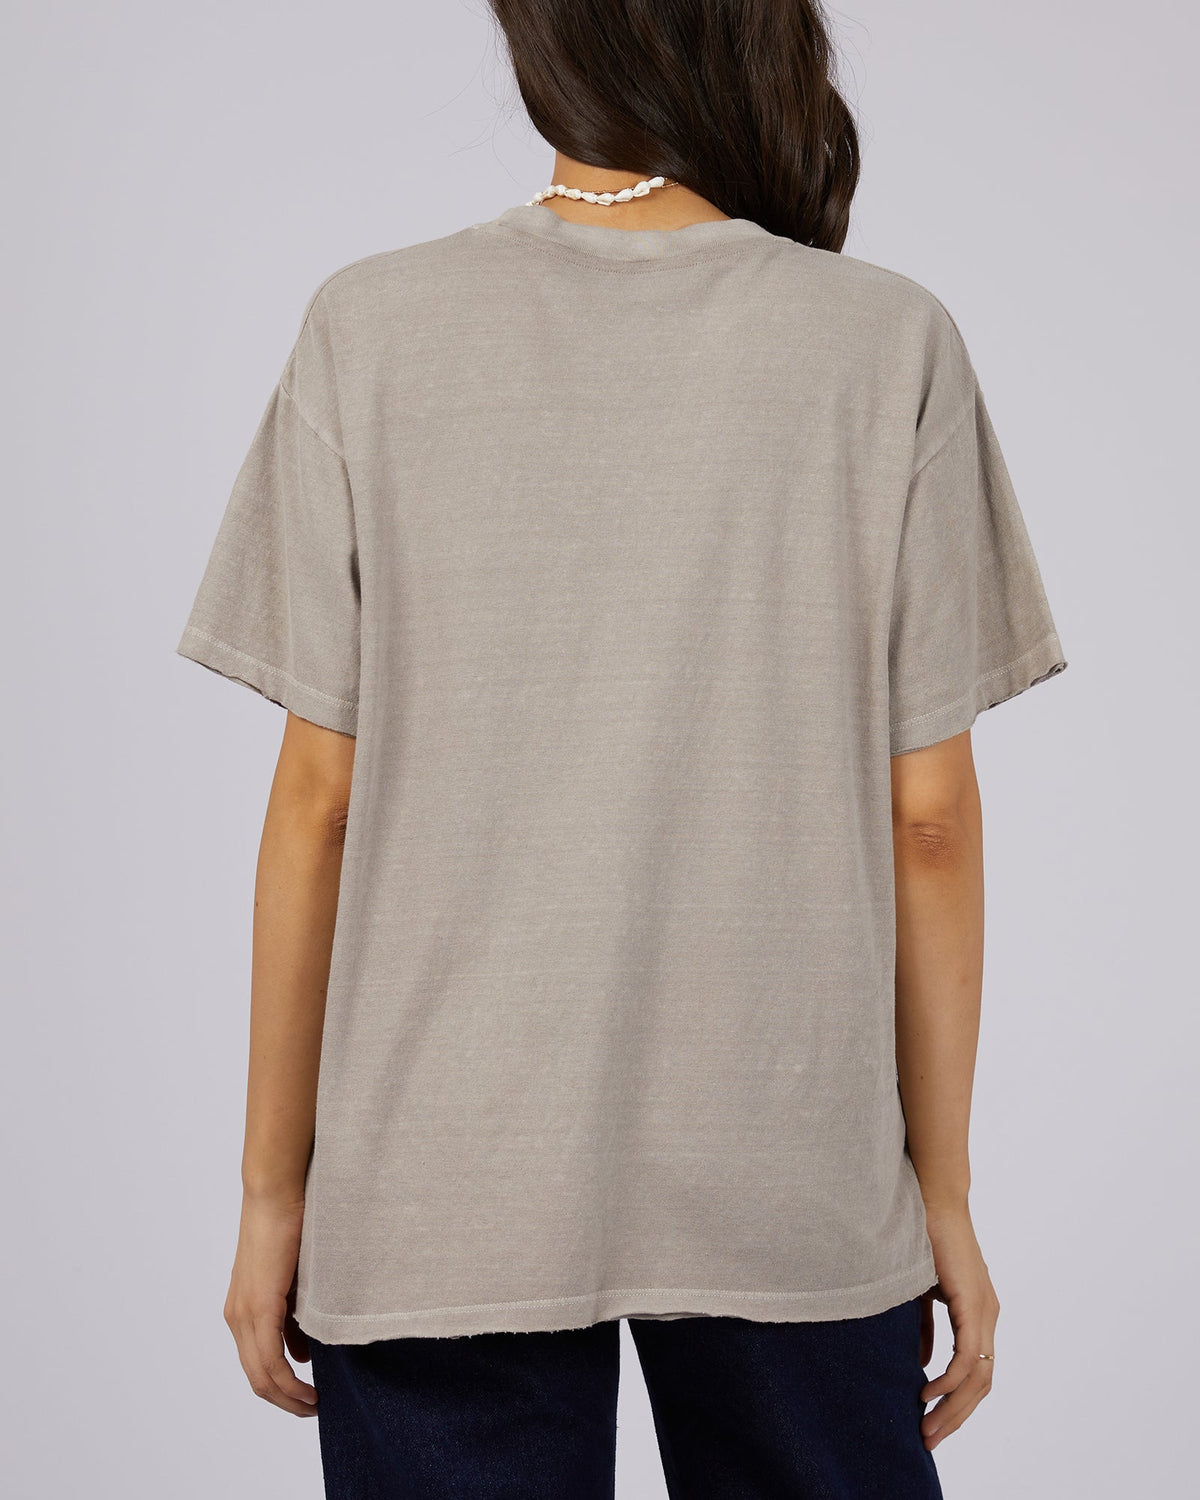 All About Eve-Rising Tee Grey-Edge Clothing